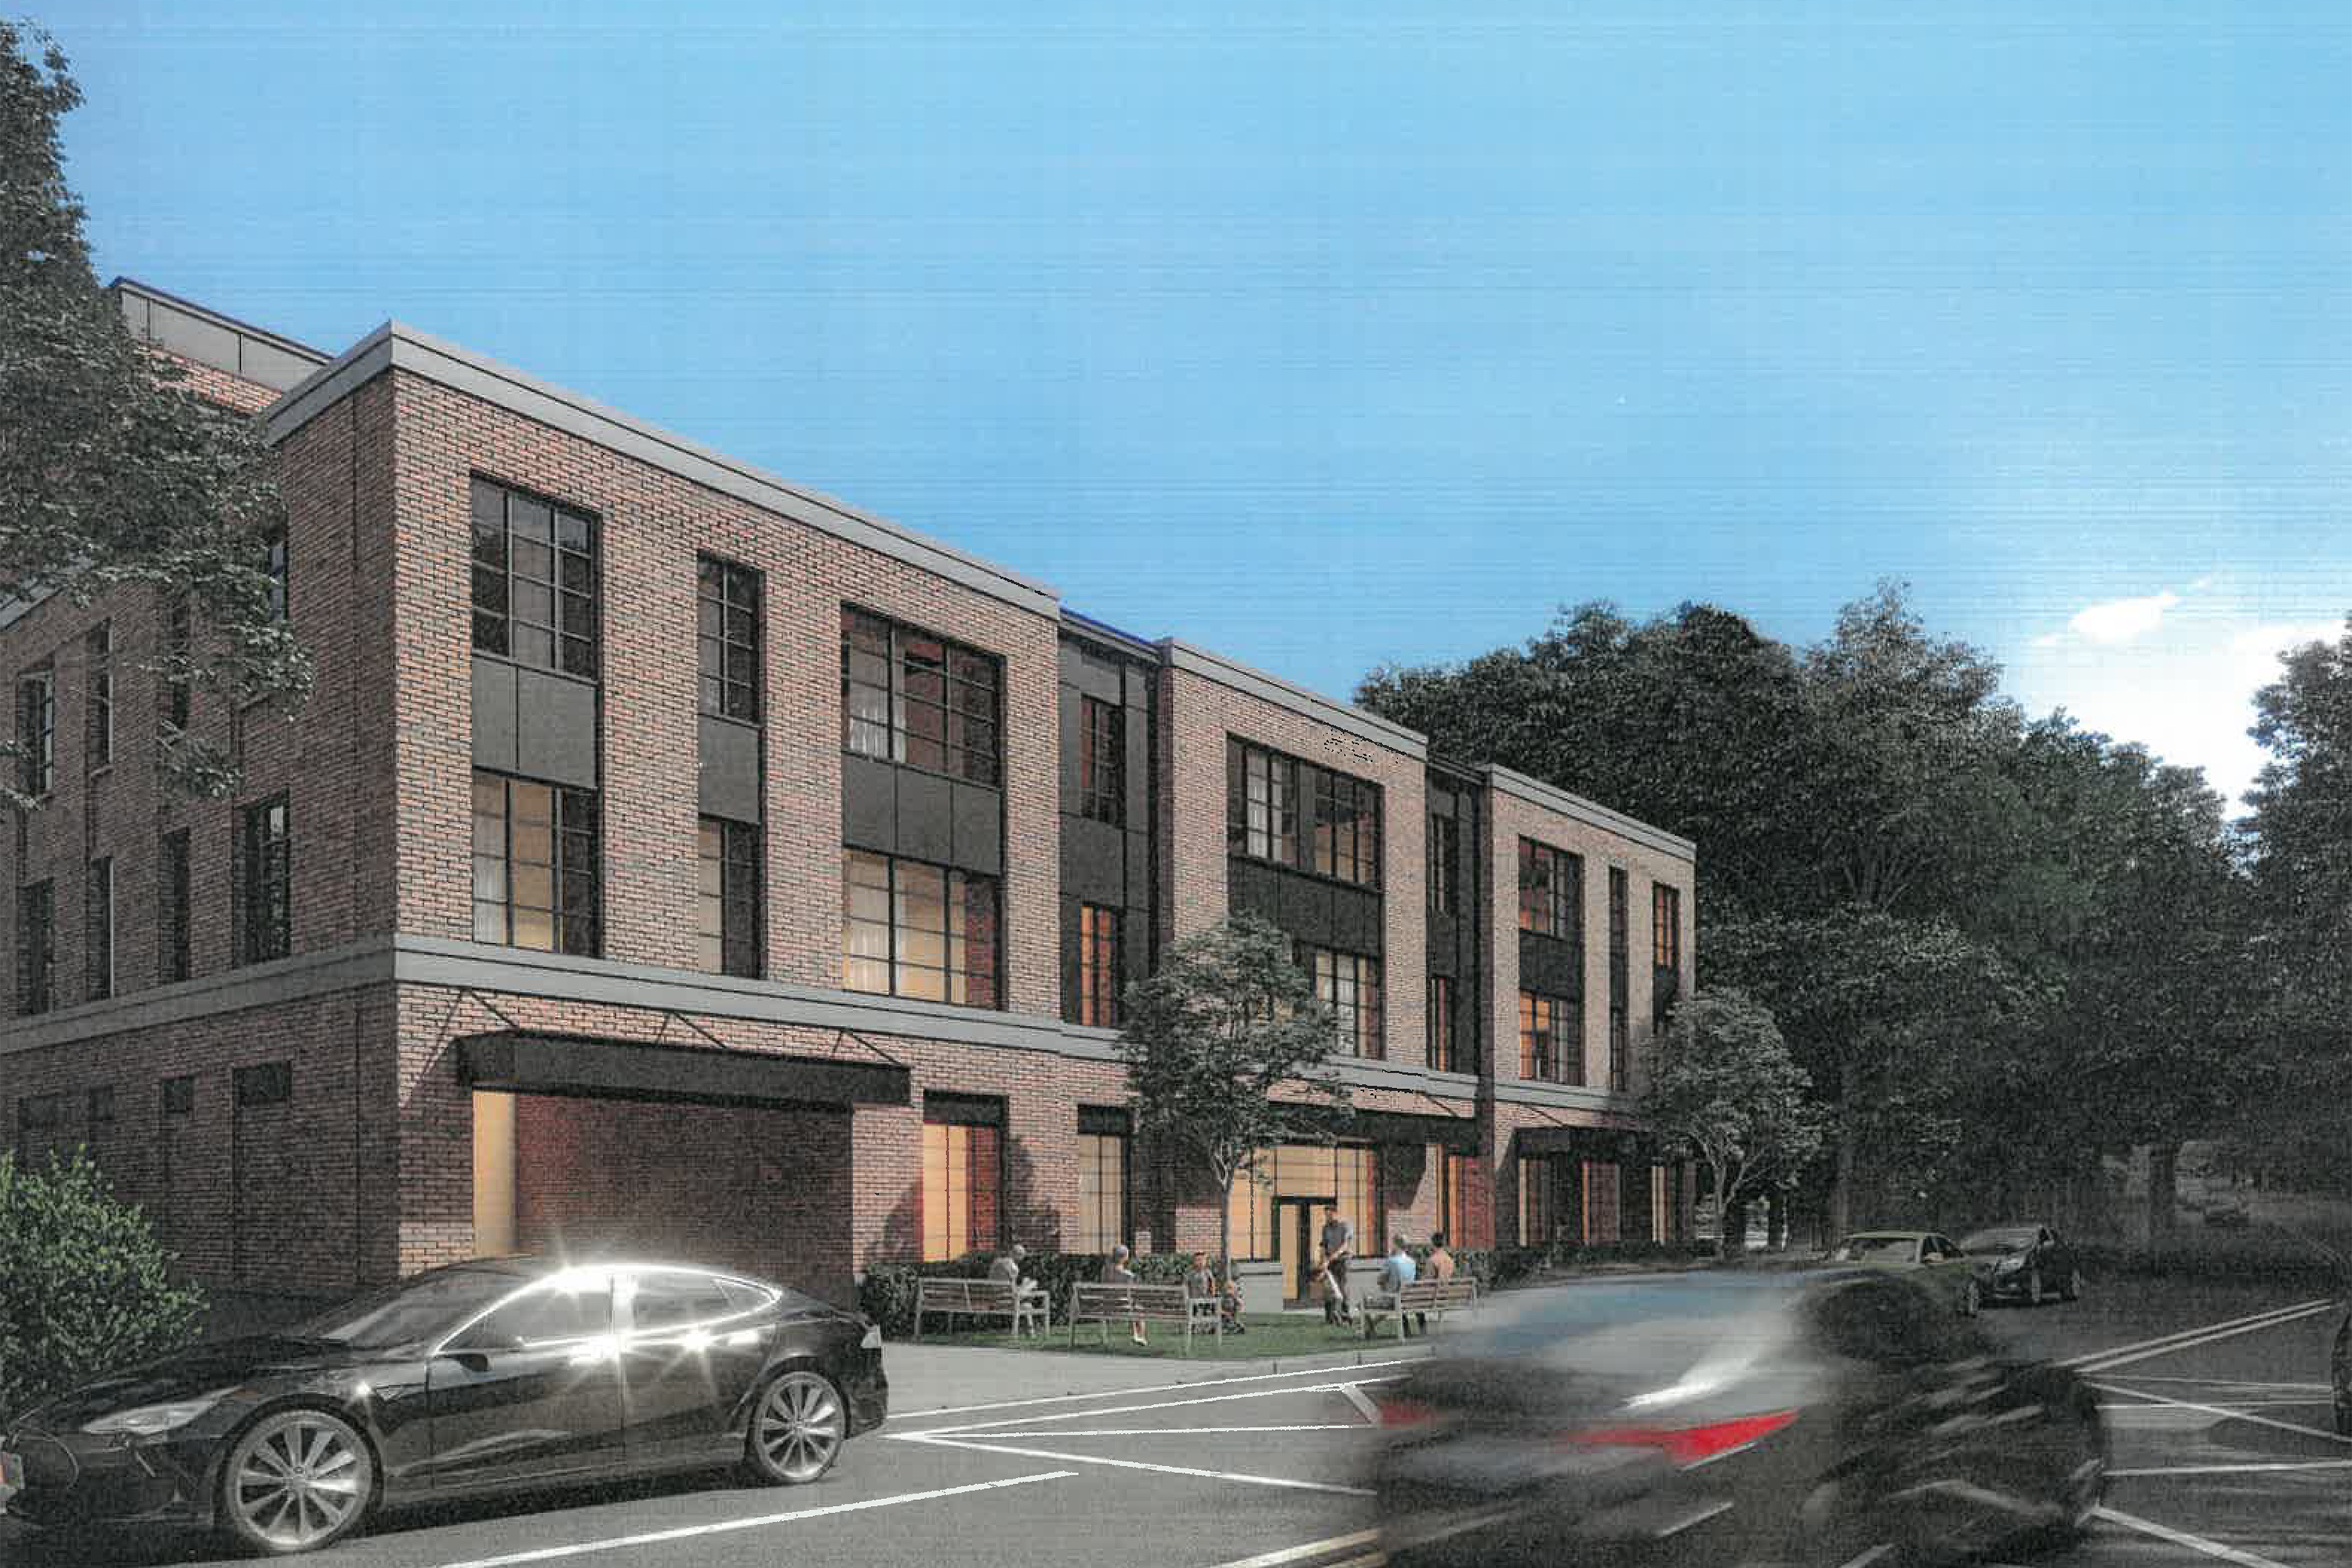 A rendering of rental apartments planned for Millburn, New Jersey's Main Street.